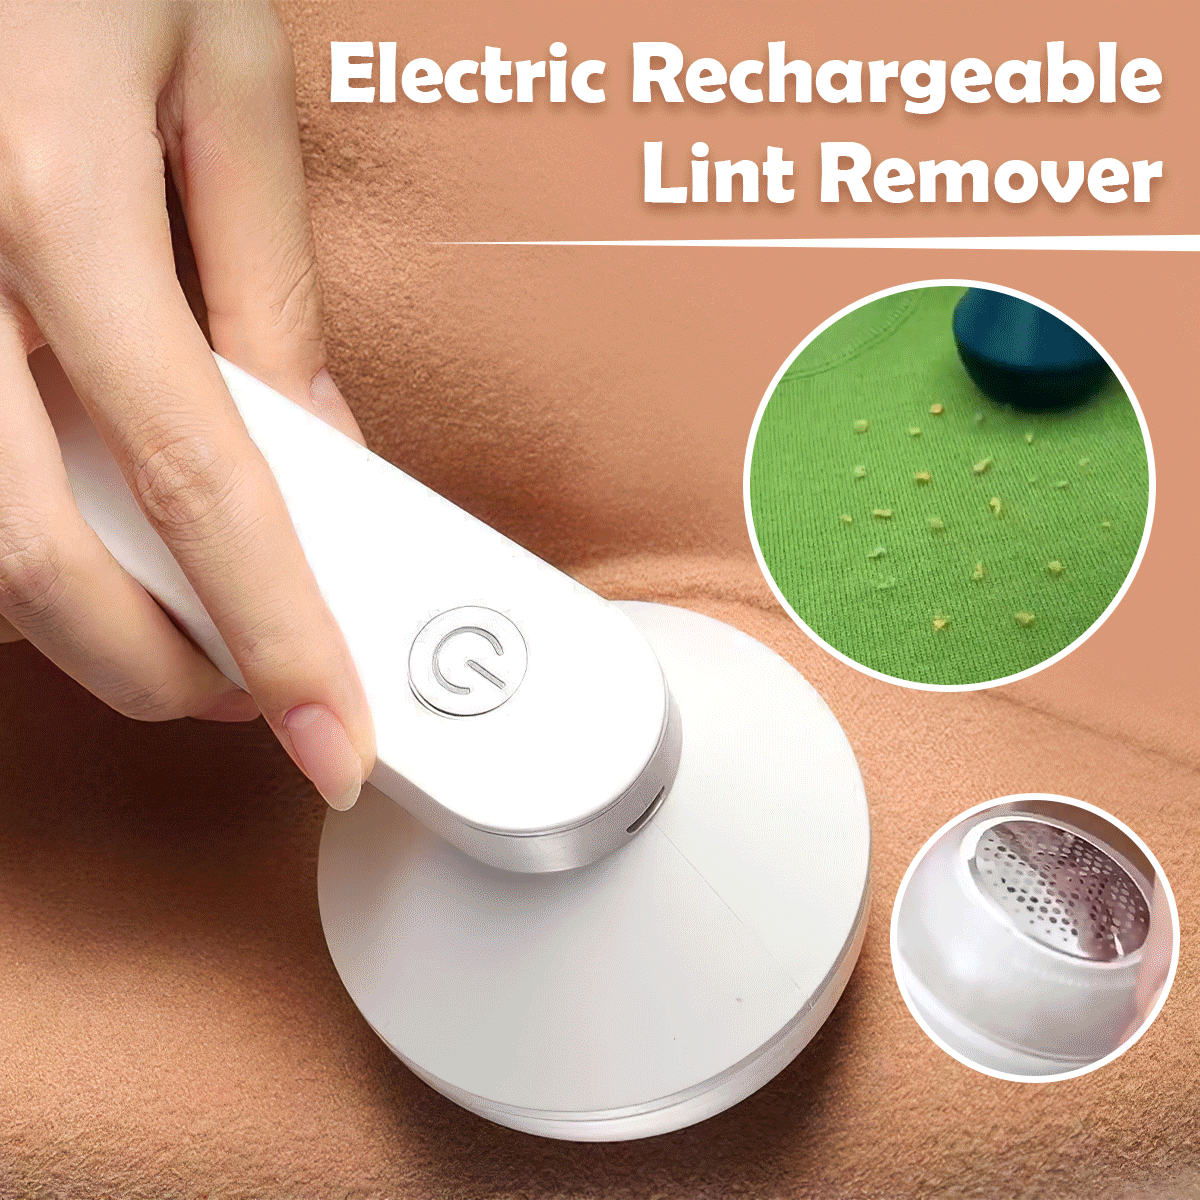 Last Chance to Save 48% on Rechargeable Electric Lint Remover